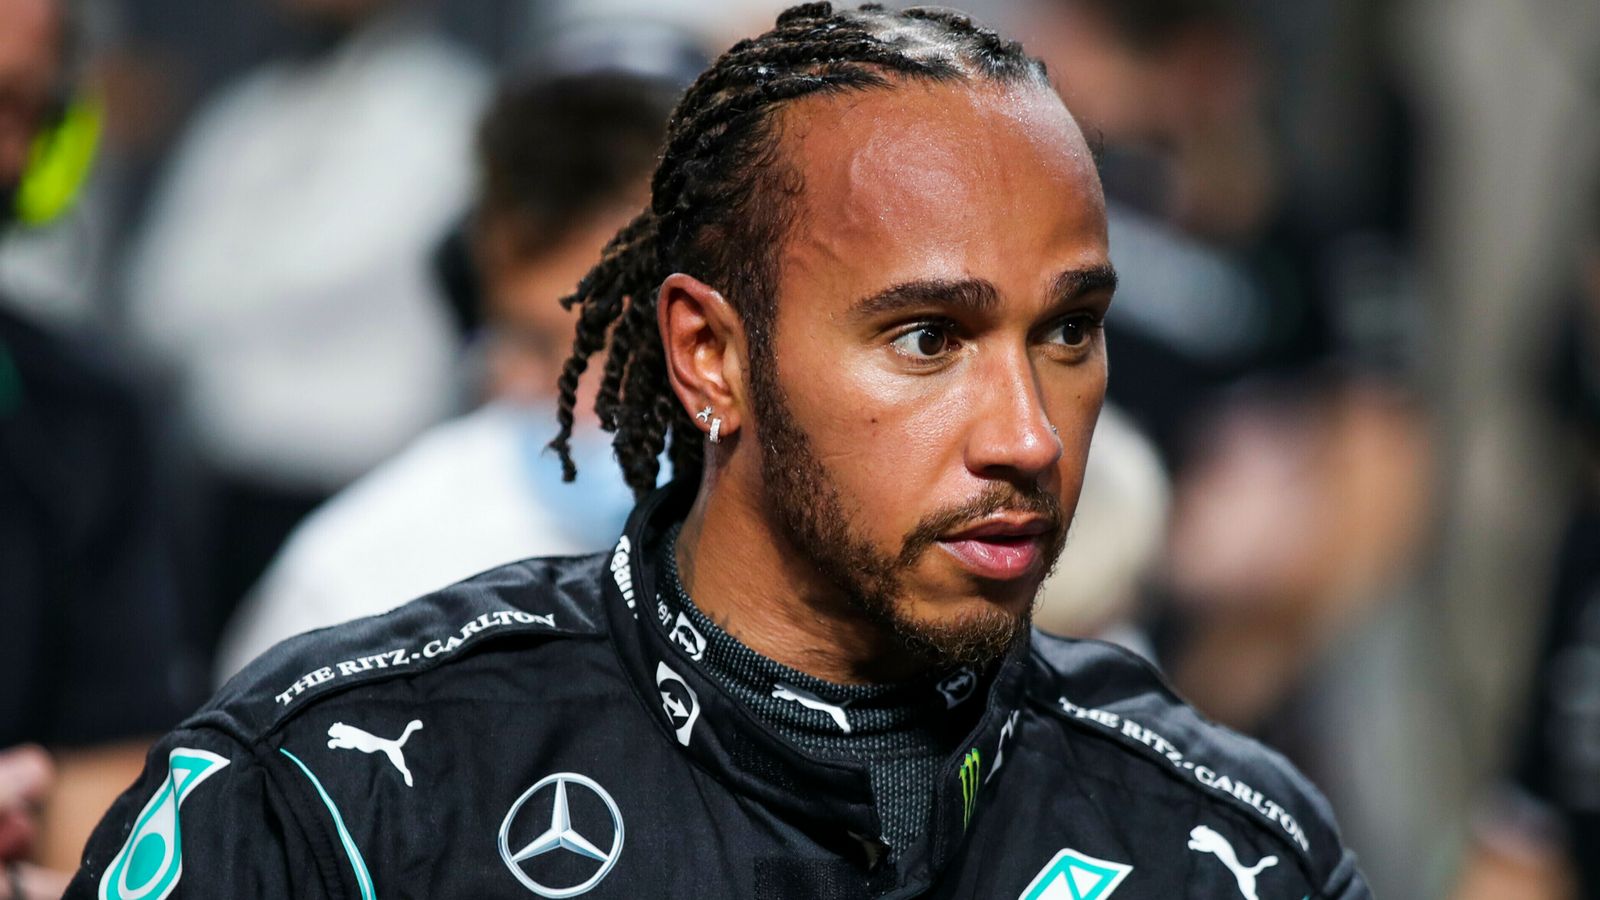 Sir Lewis Hamilton breaks silence for first time since F1's ...